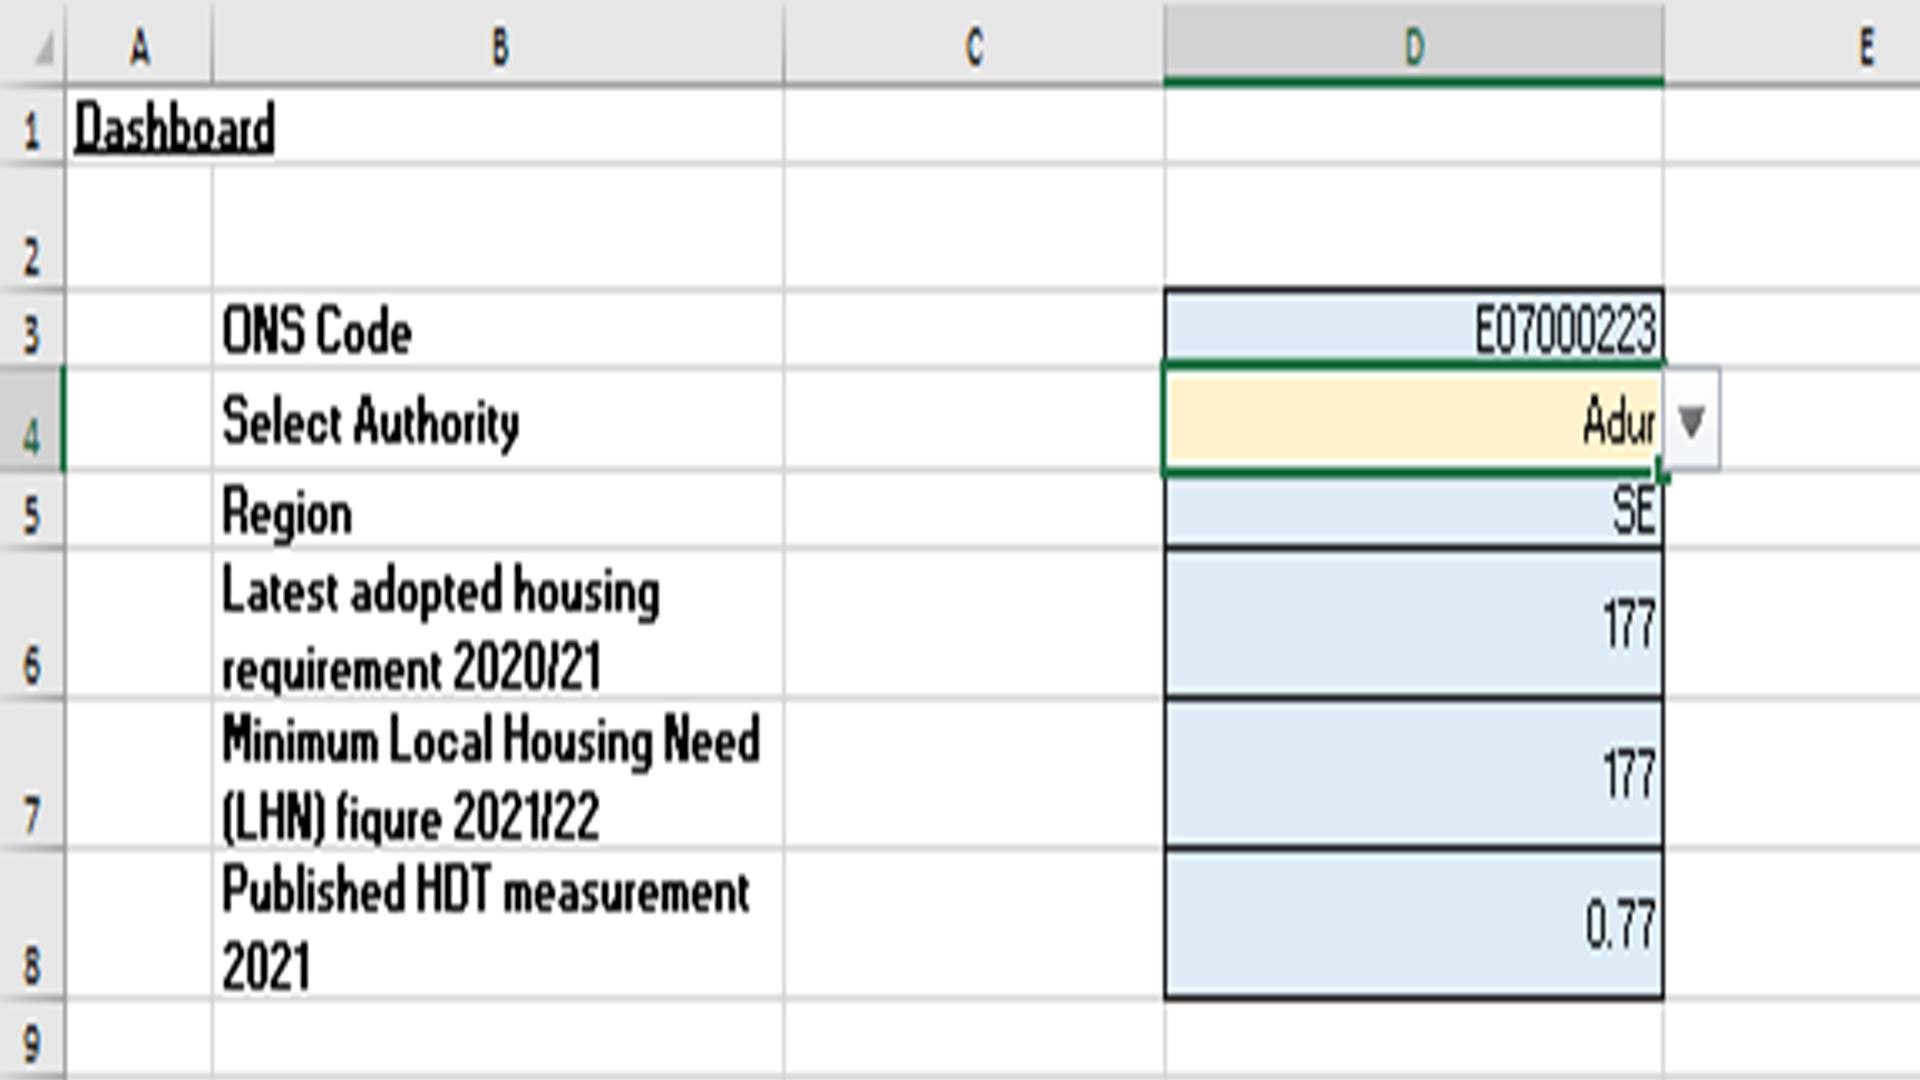 This shows the calculation and various data inputs for the Housing Delivery test Policy